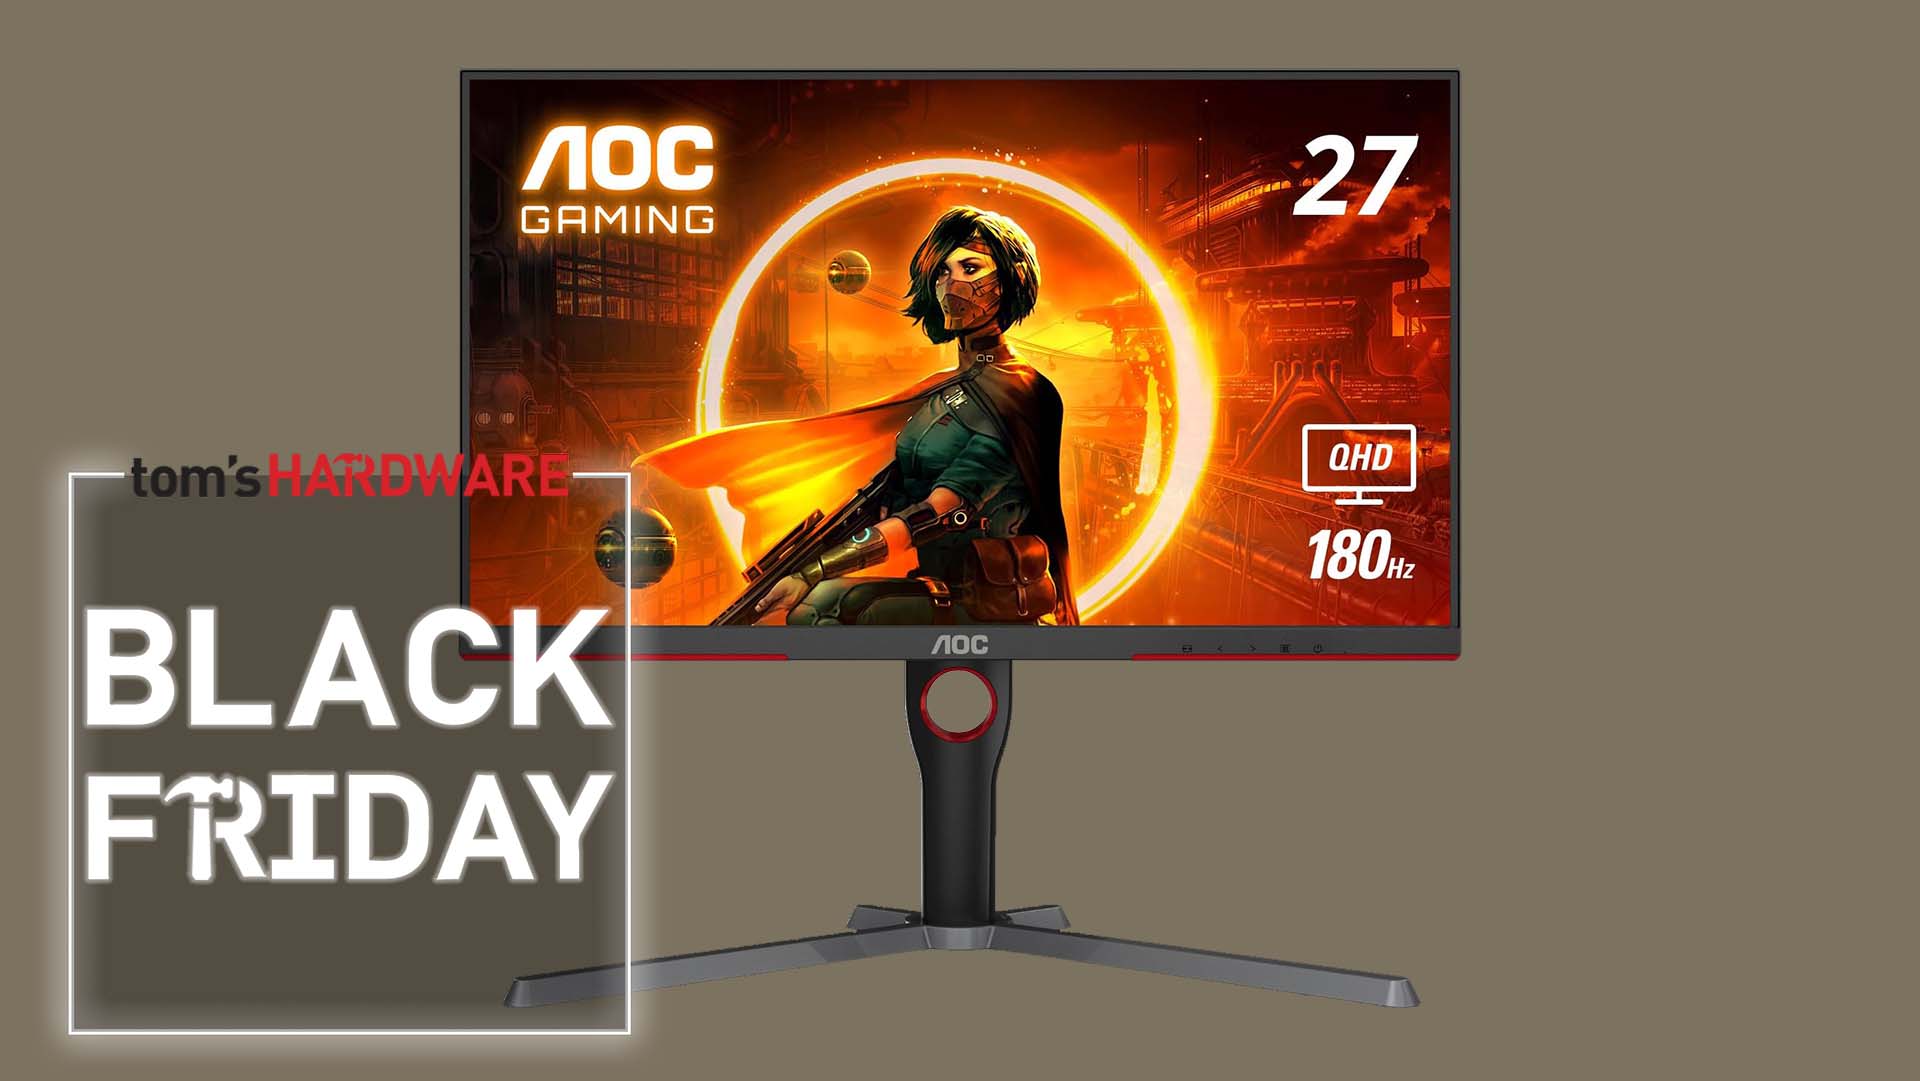 TotallydubbedHD on X: Real HDR gaming monitor on a budget! 😍 The AOC  Q27G3XMN is a 27 1440p 180Hz VA gaming monitor with Mini LED, FALD &  HDR1000! 🔥 ➡️Find out how